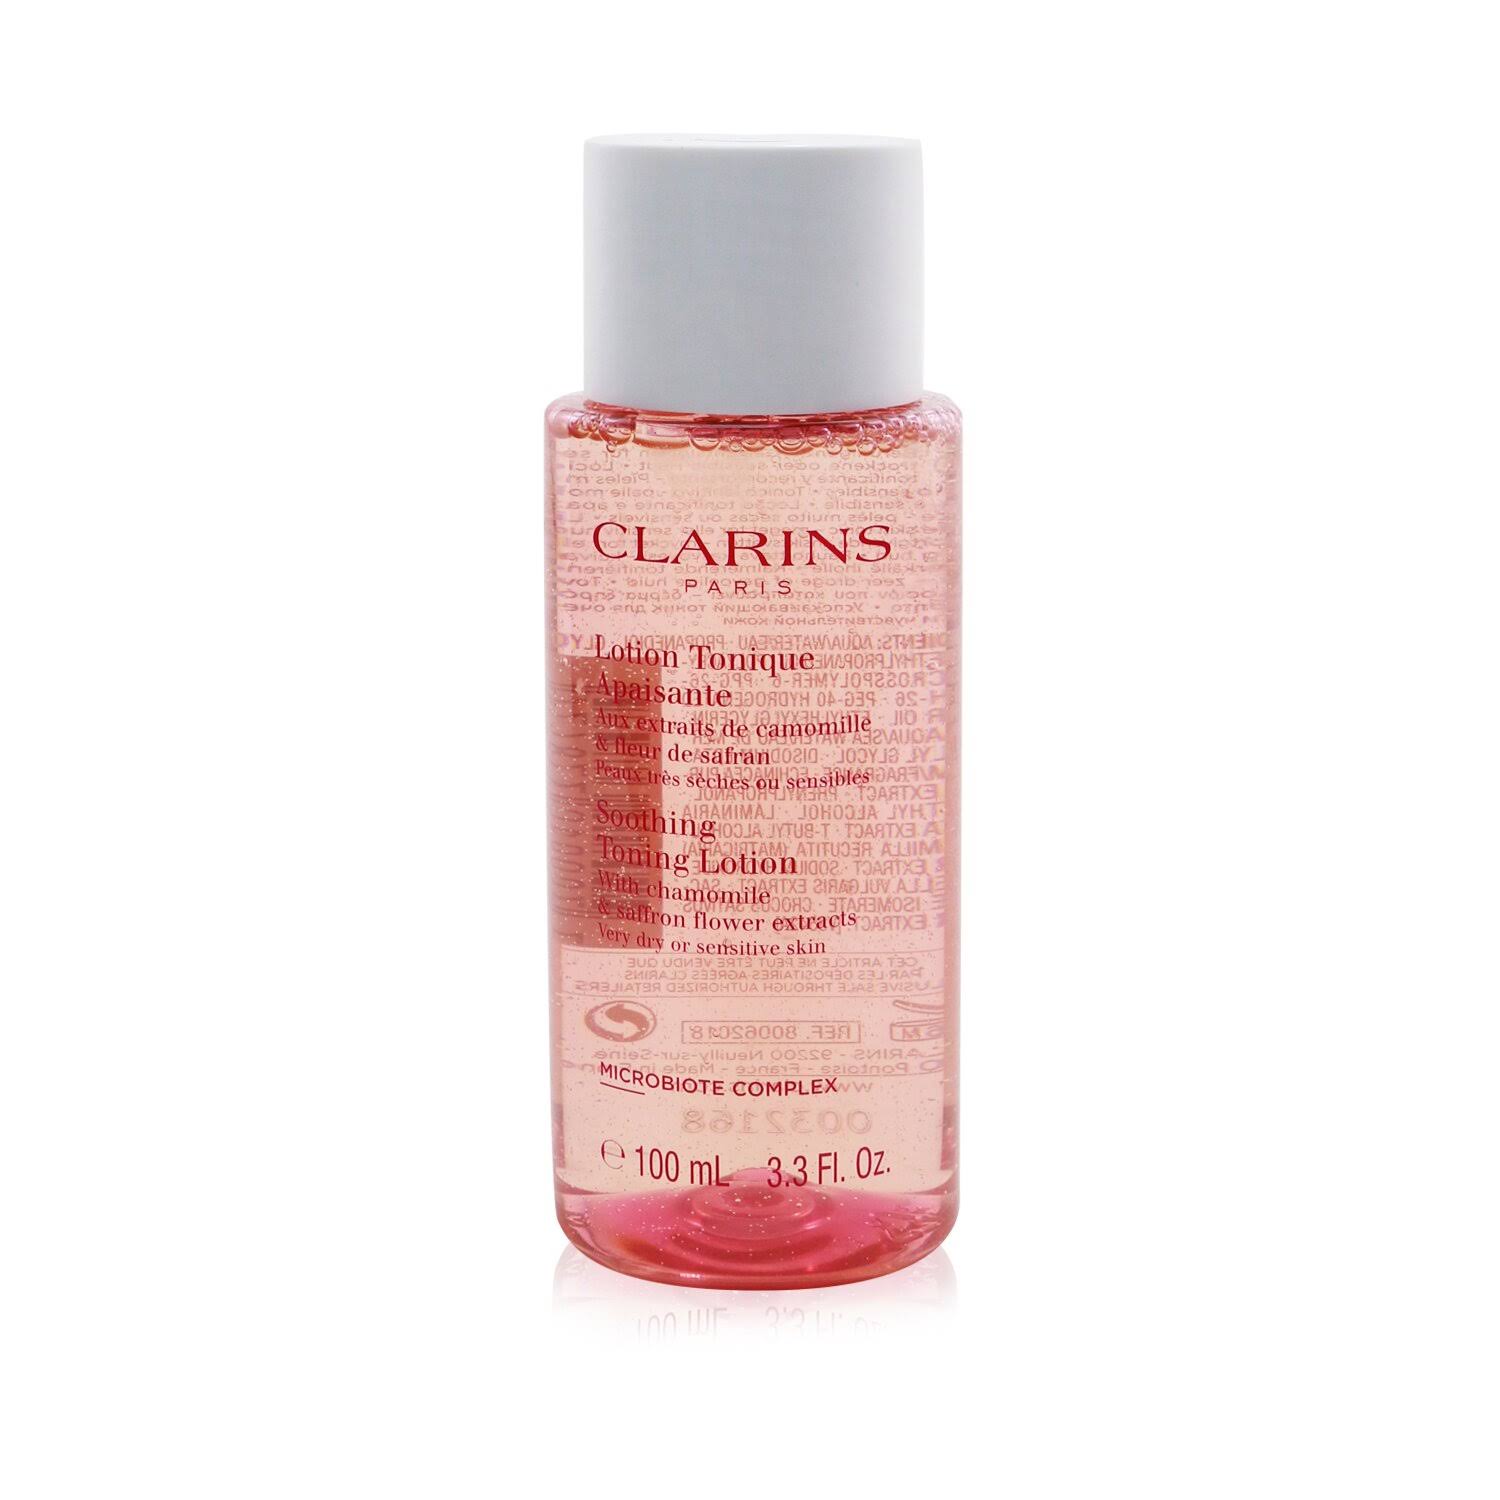 Clarins Soothing Toning Lotion with Chamomile & Saffron Flower Extracts 3.3 oz